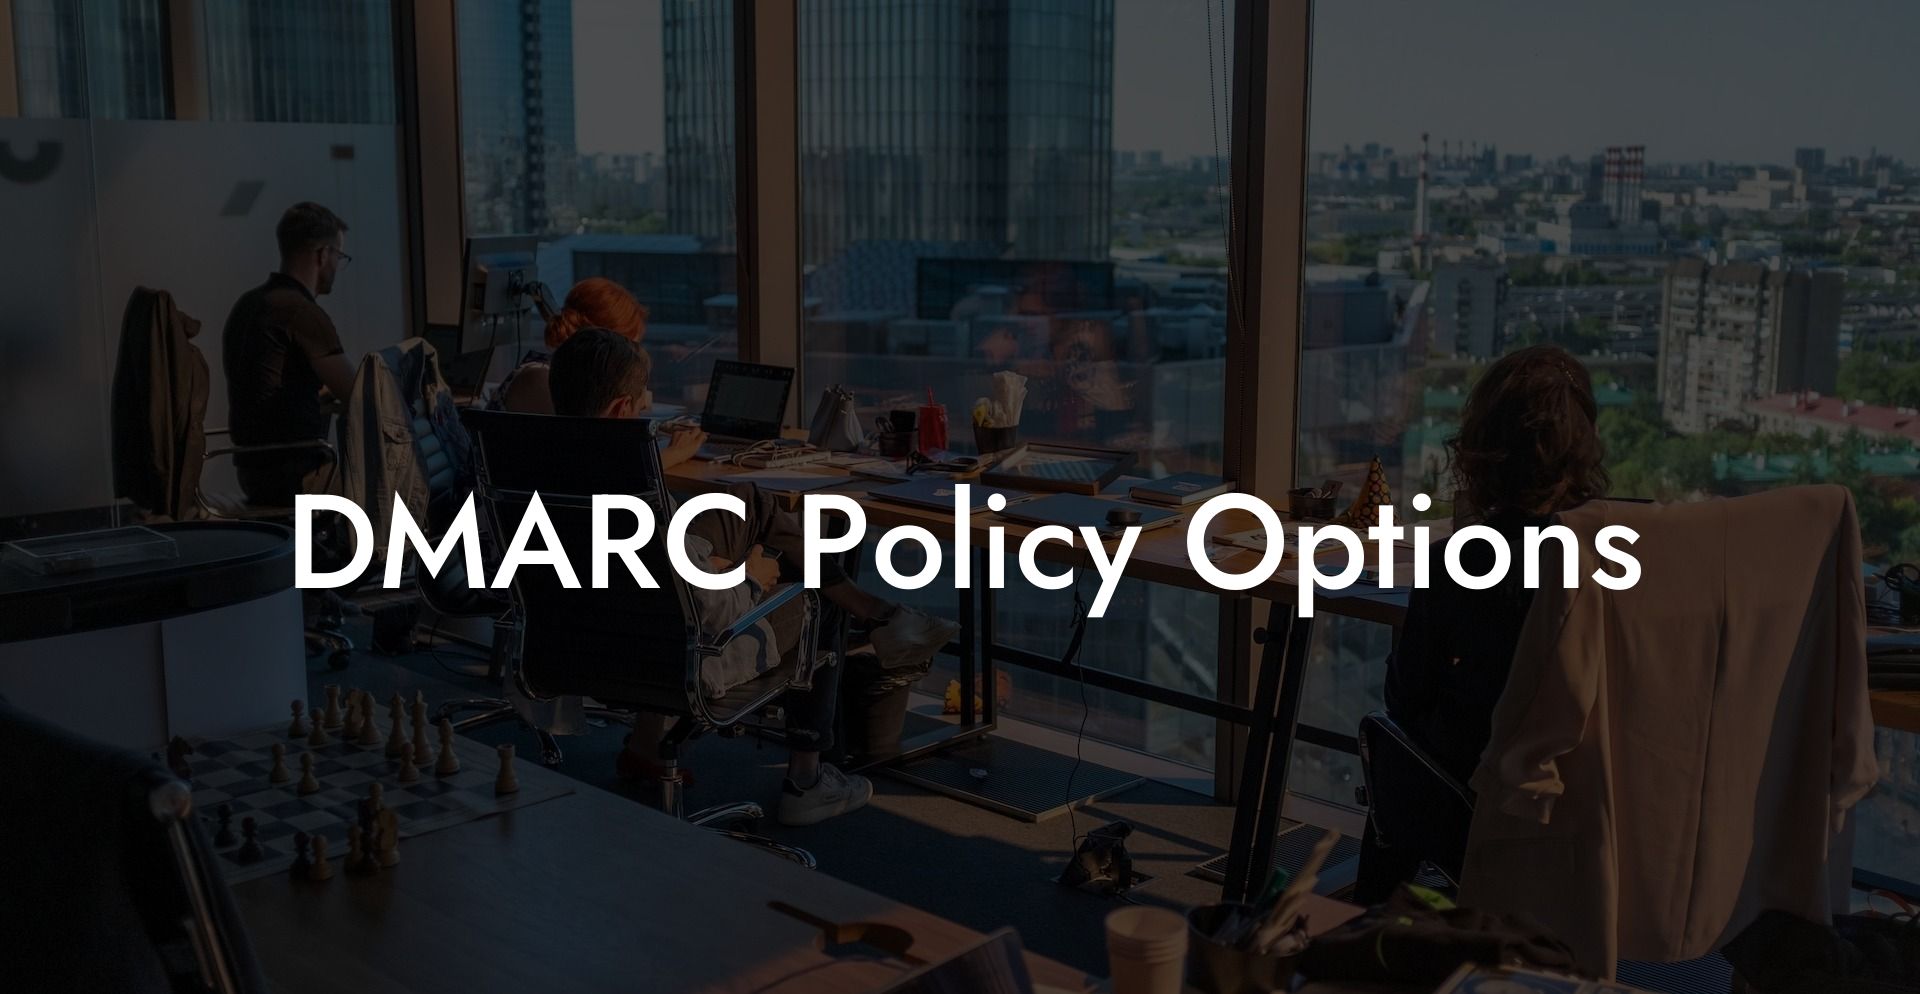 DMARC Policy Options